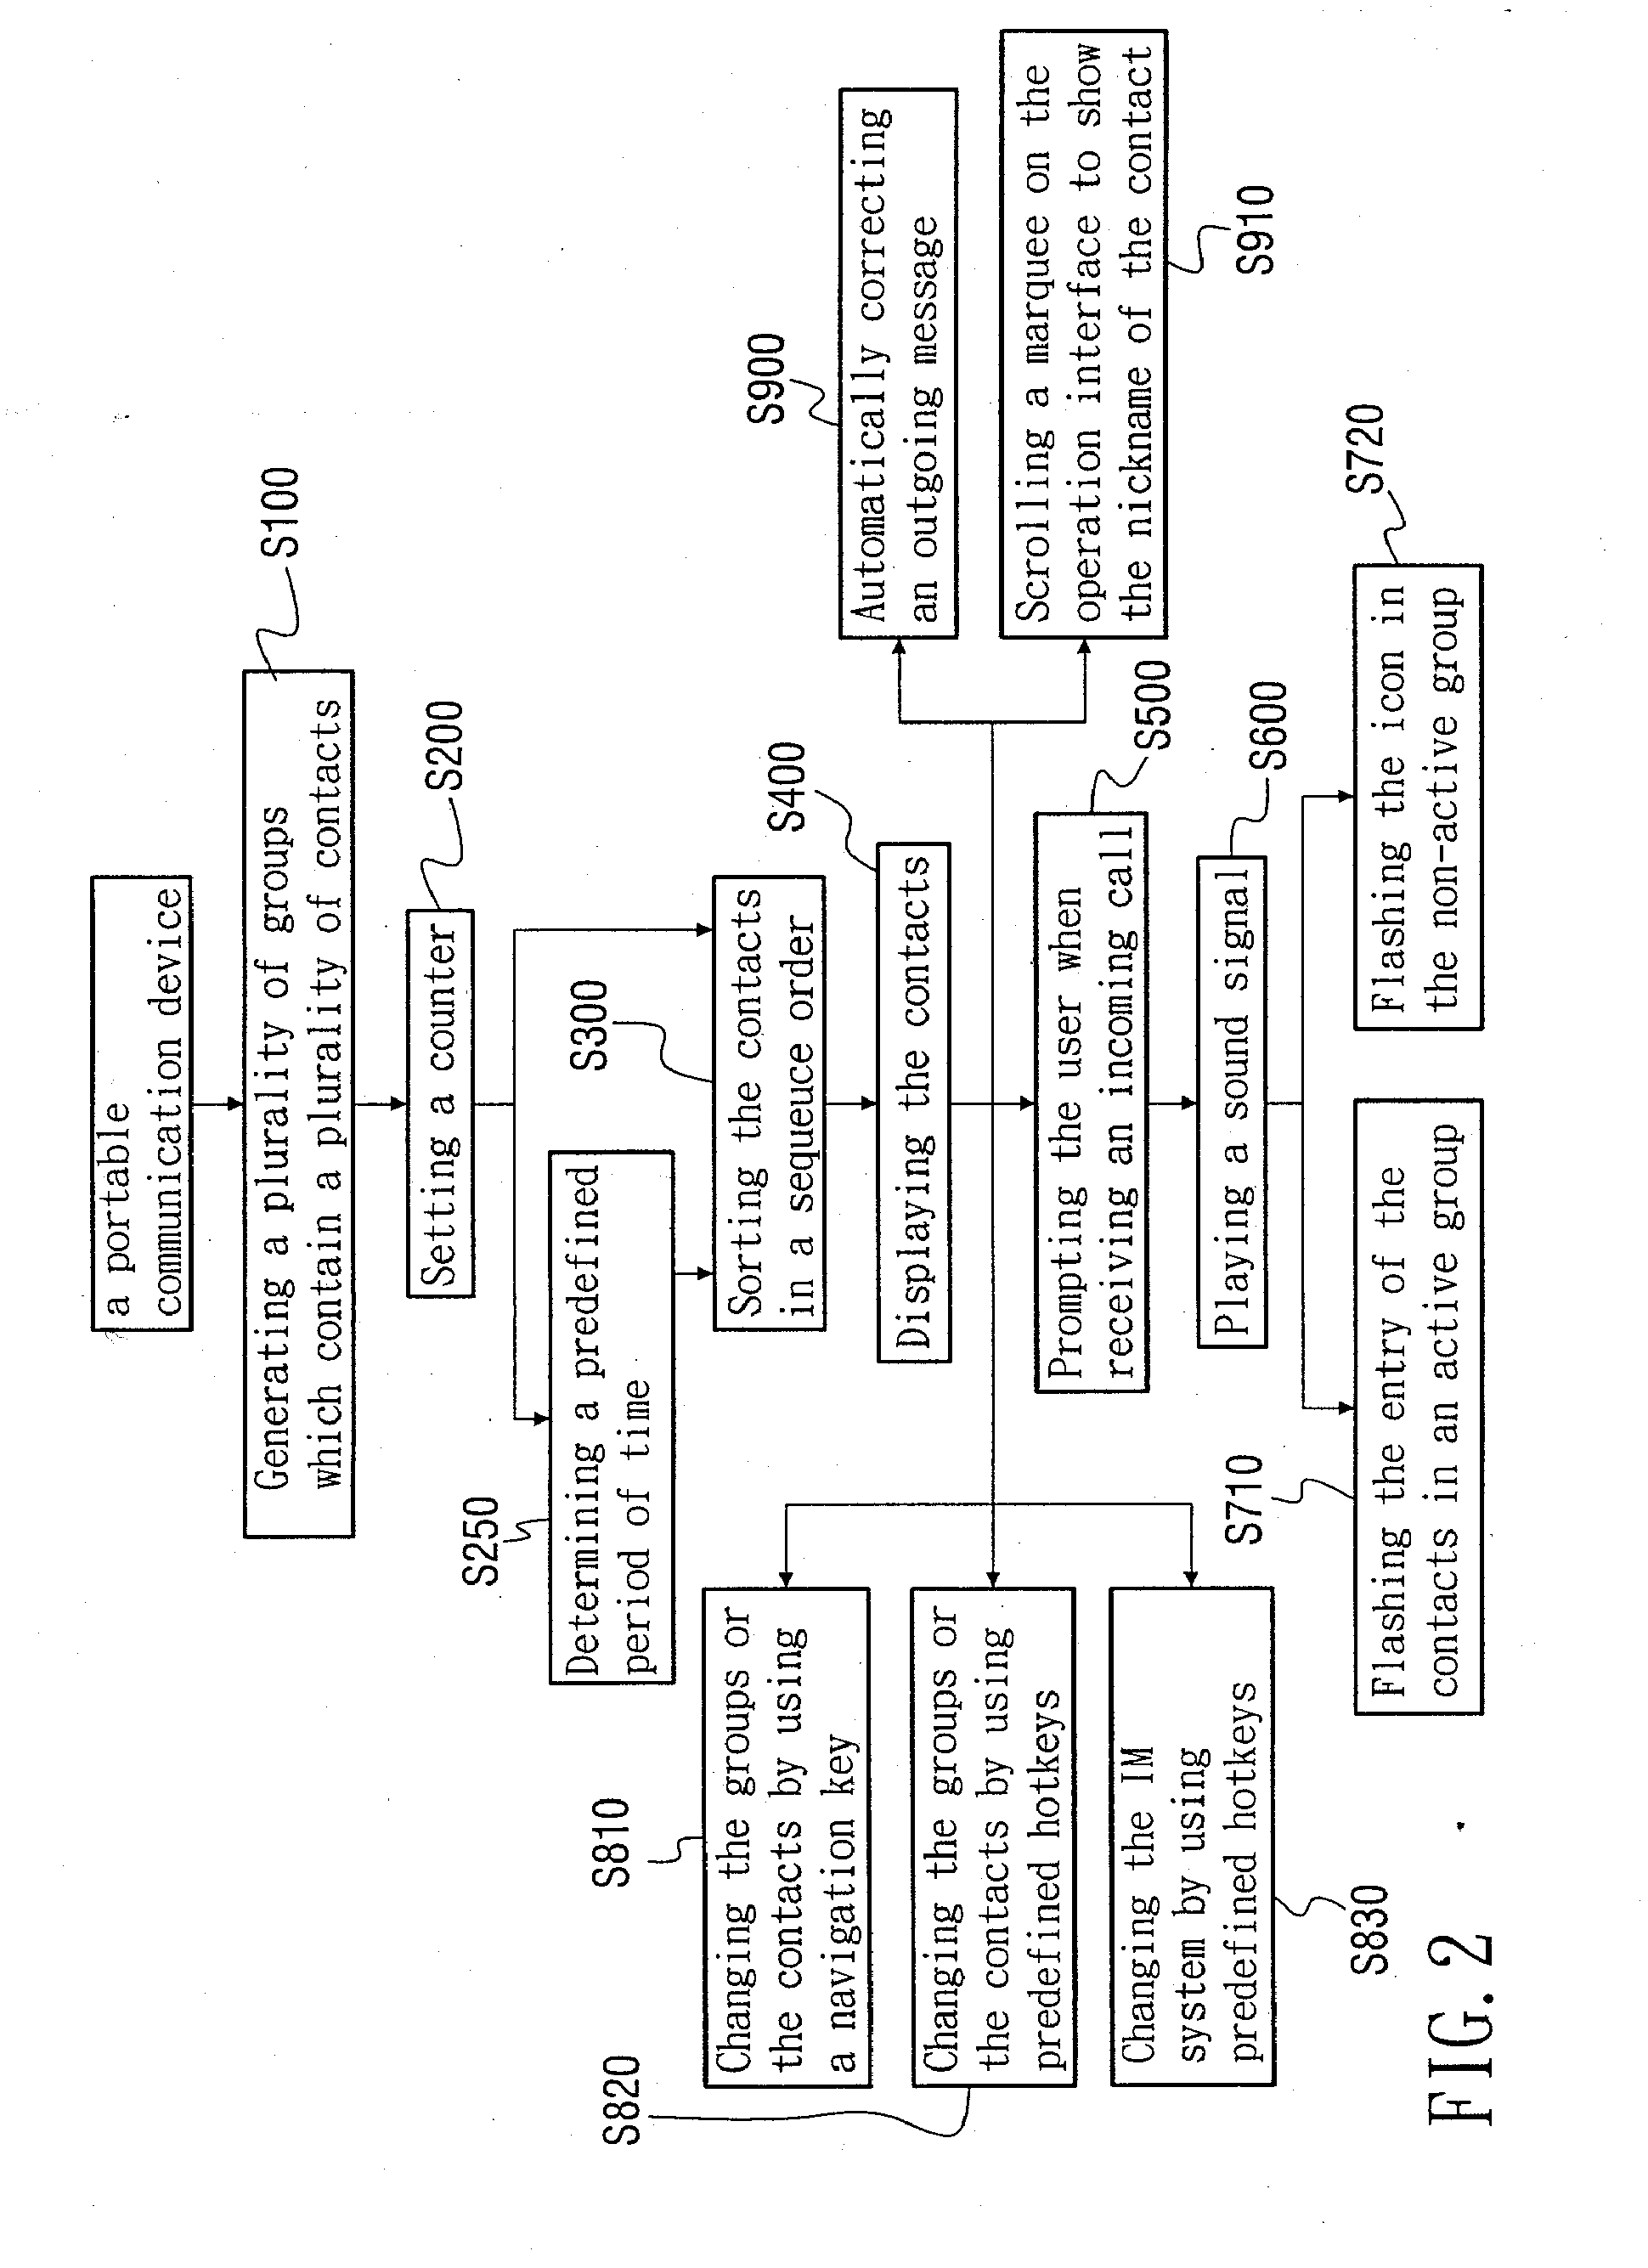 Methods of Implementing an Operation Interface for Instant Messages on a Portable Communication Device